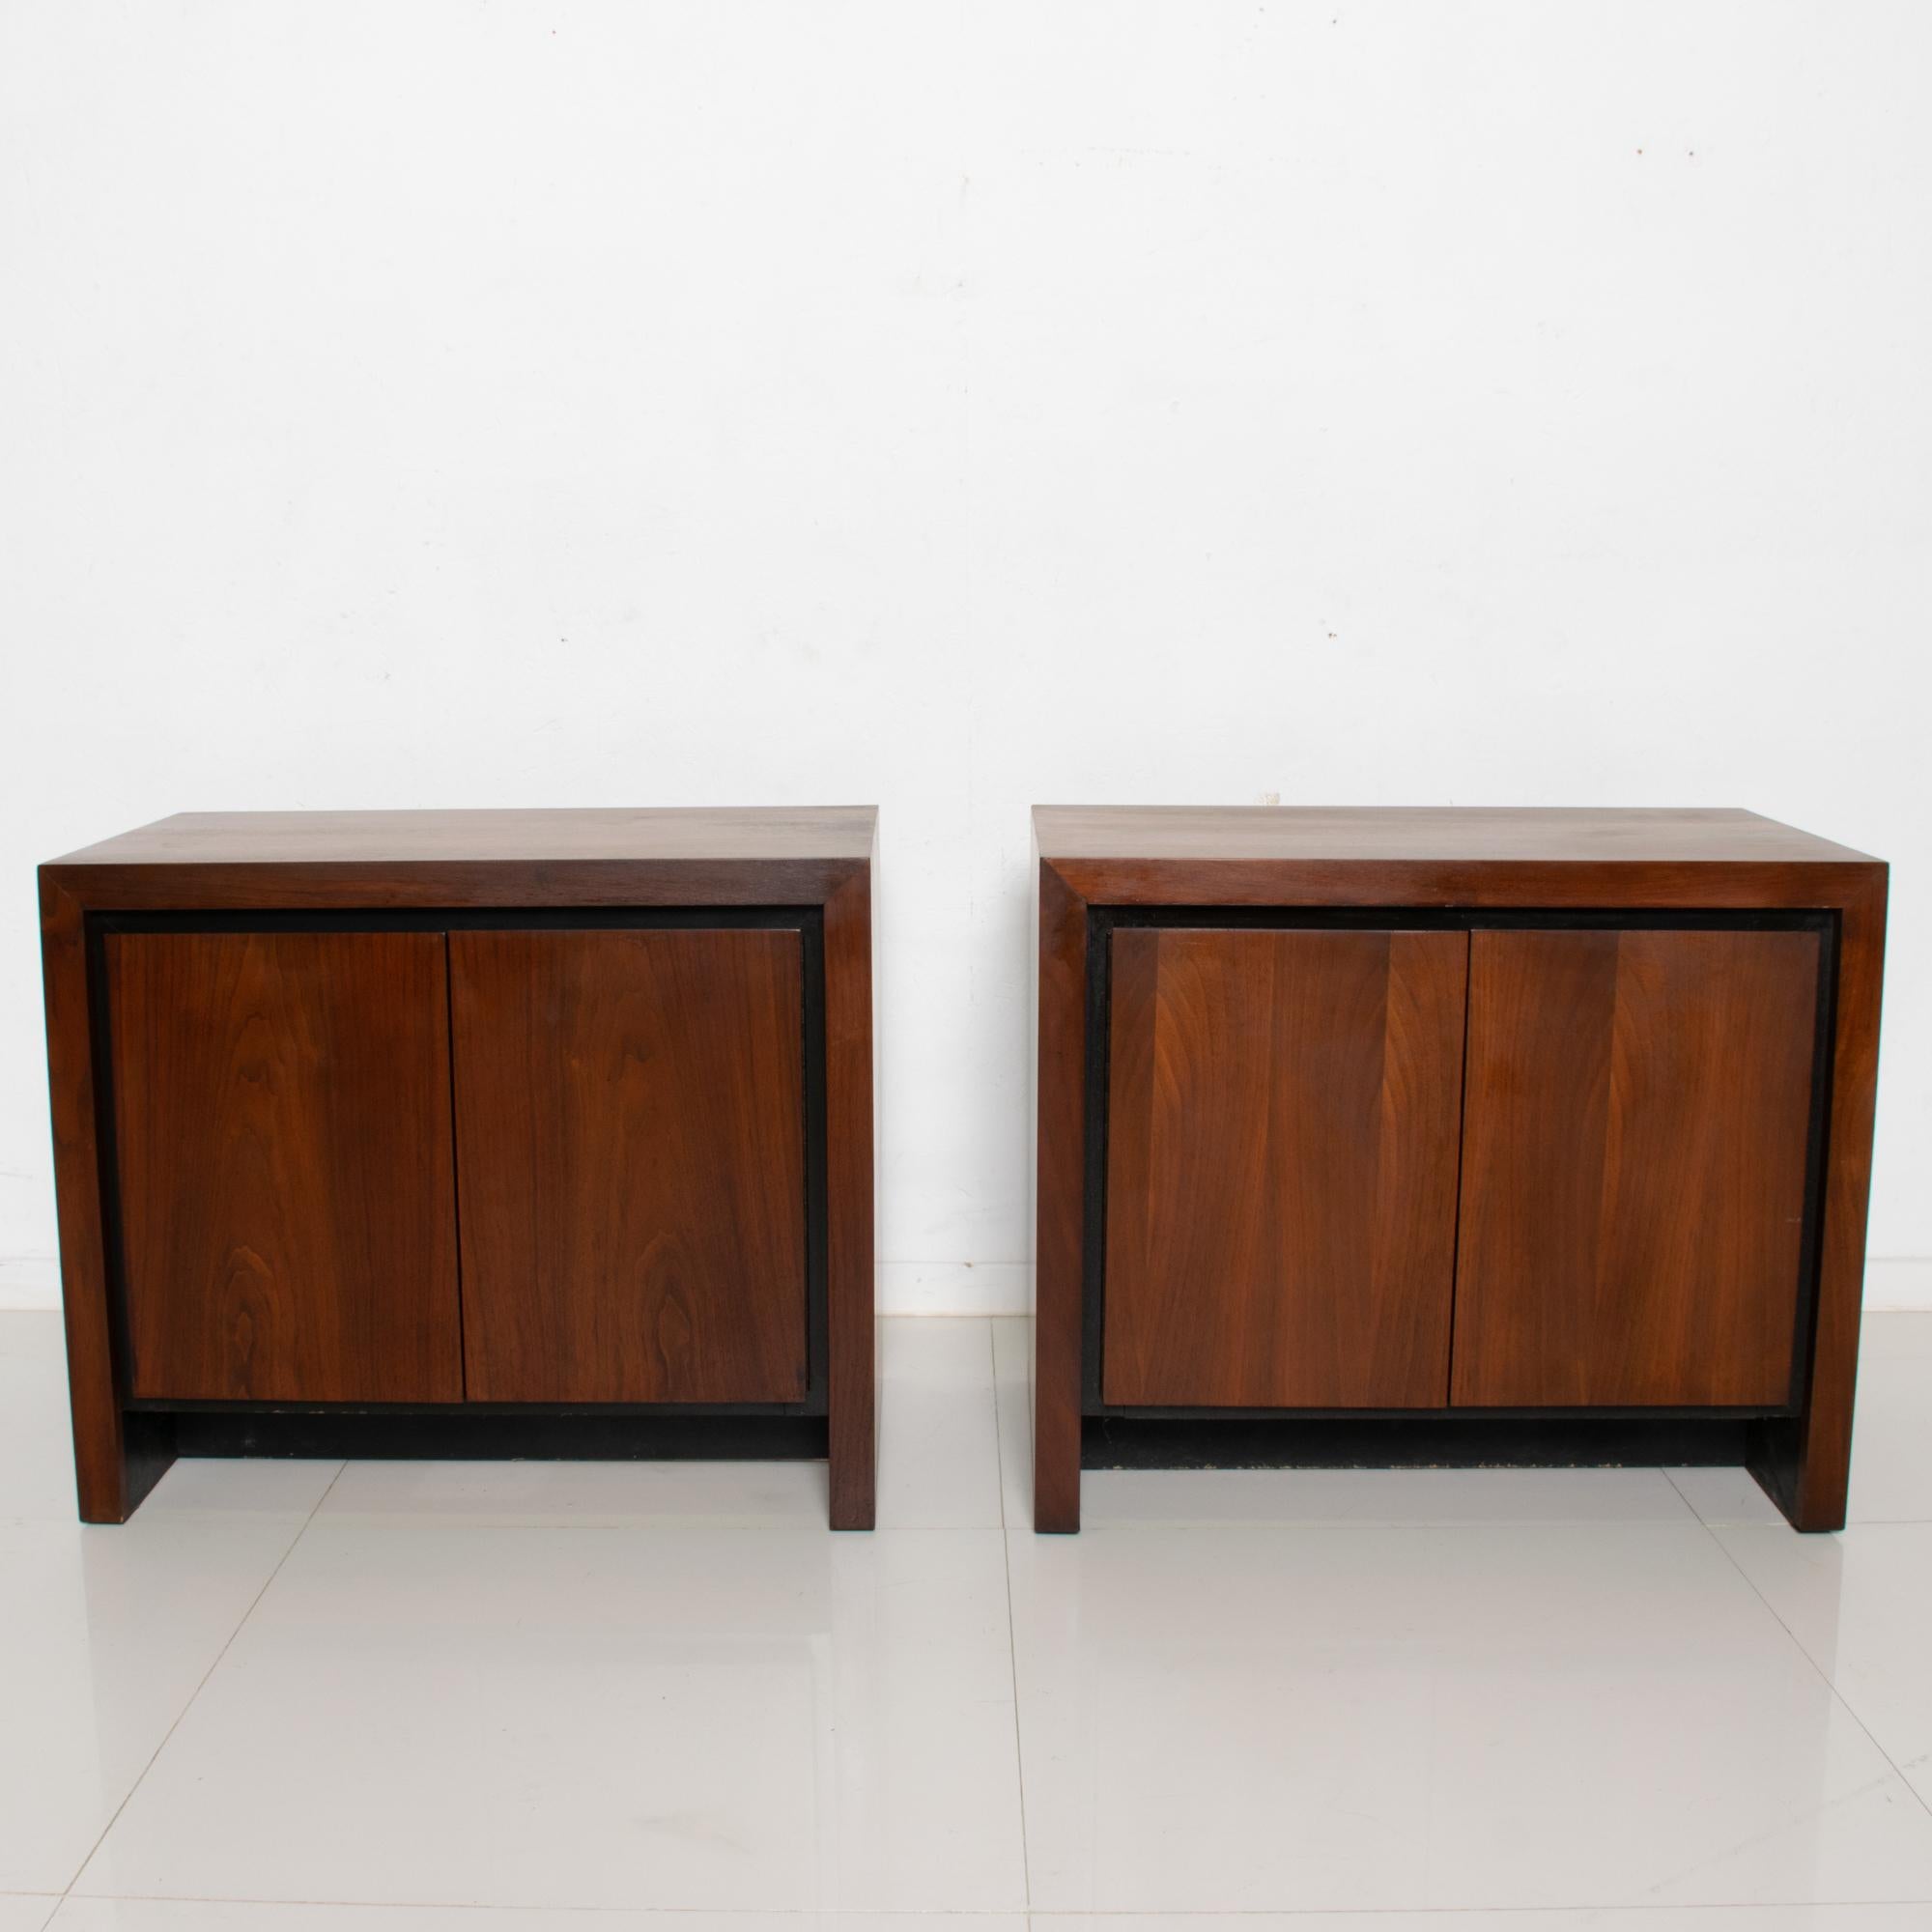 Fabulously modern Dillingham rich walnut nightstands side tables with swing doors, USA, circa early 1970s.

Dimensions: 27